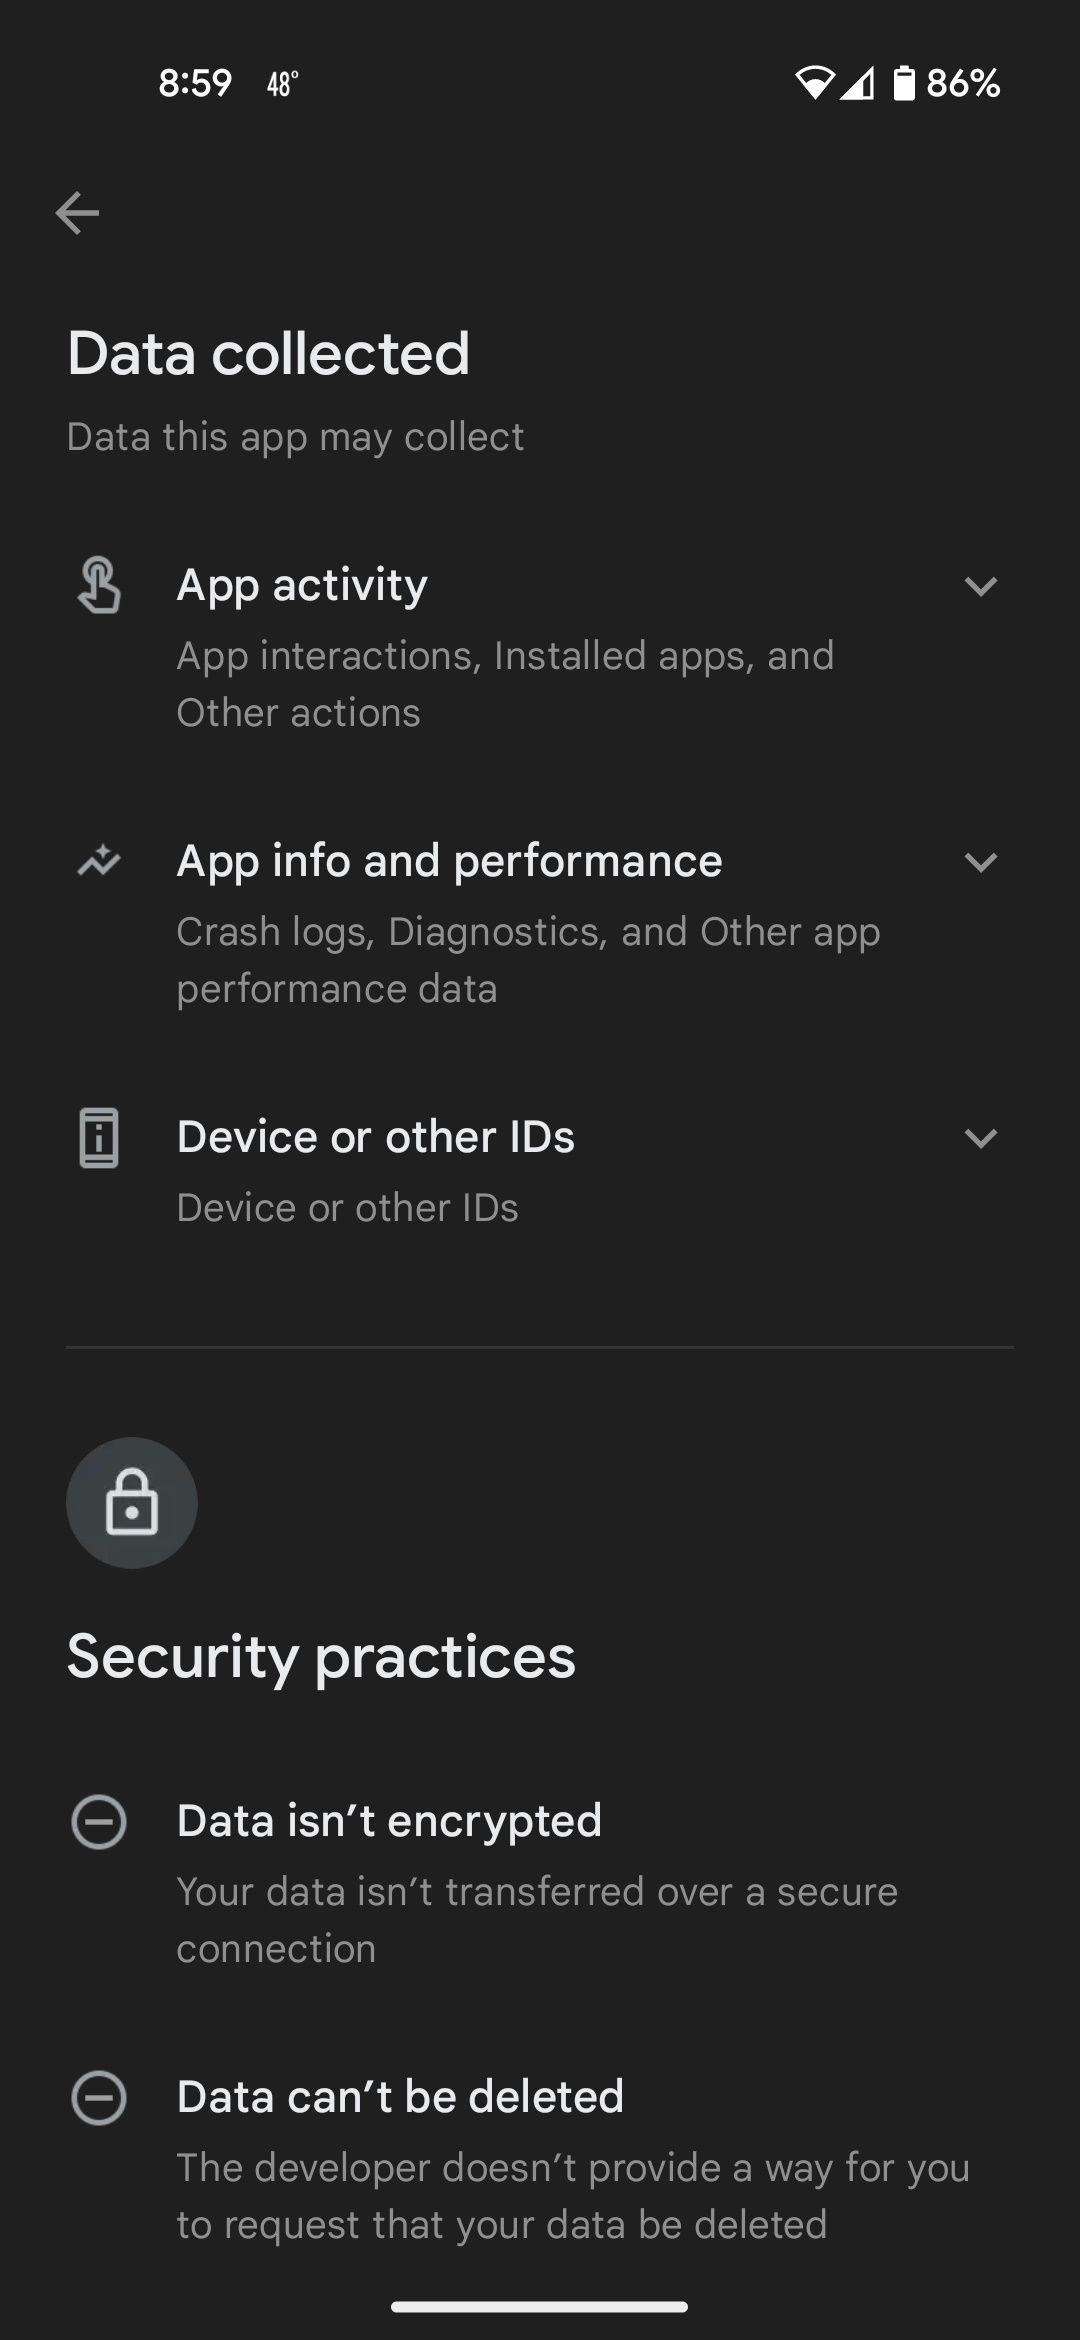 Details listing how an app collects data and keeps it safe